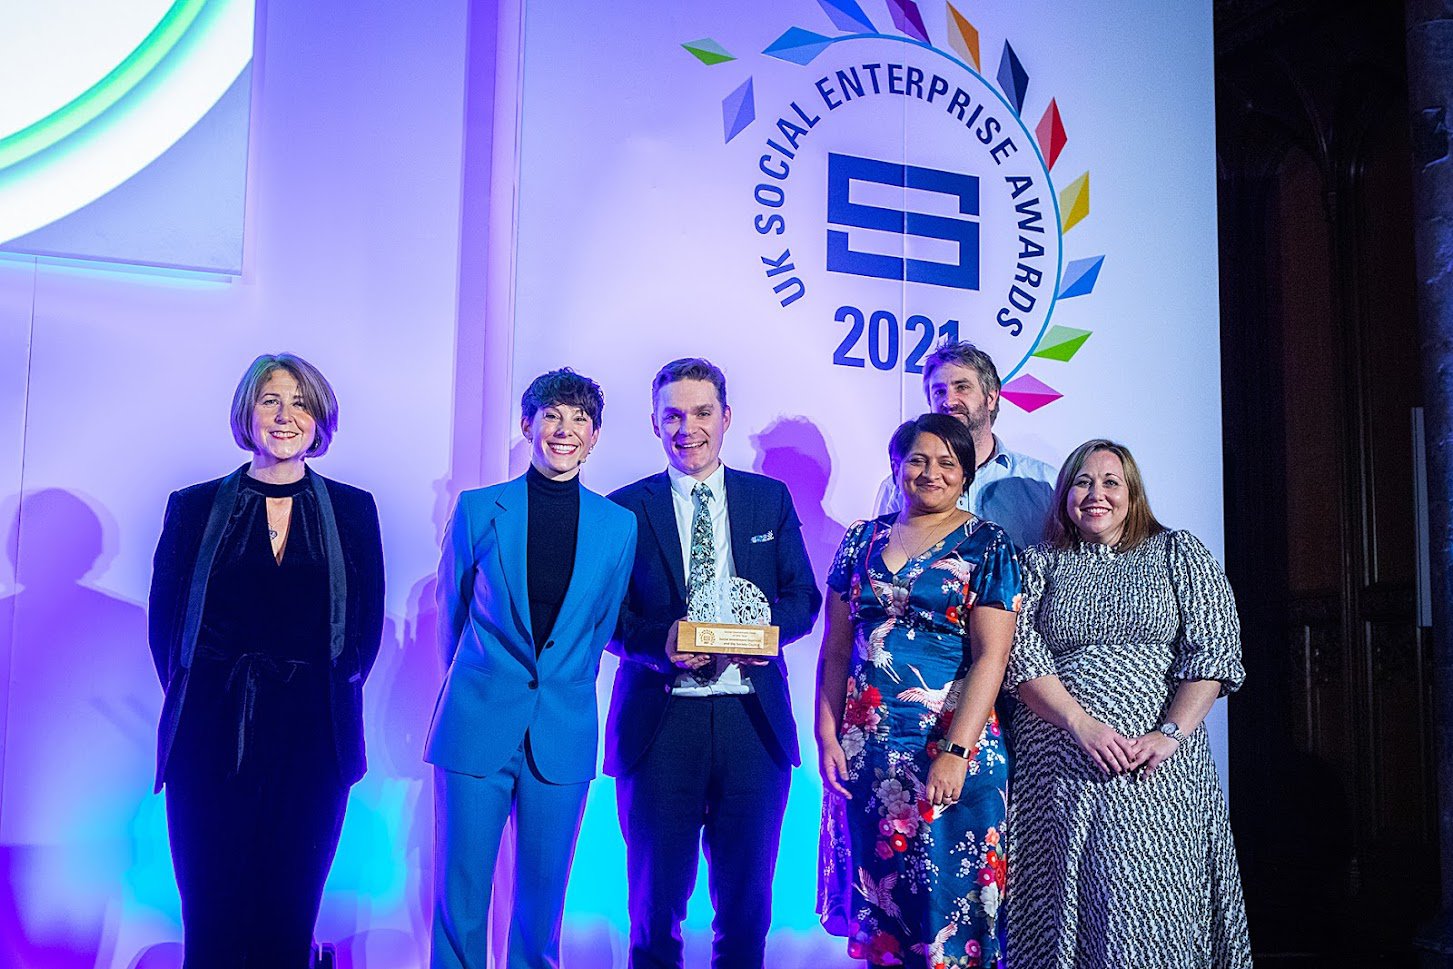 Social Investment Deal of the Year - SIB and Big Society Capital (002).jpg